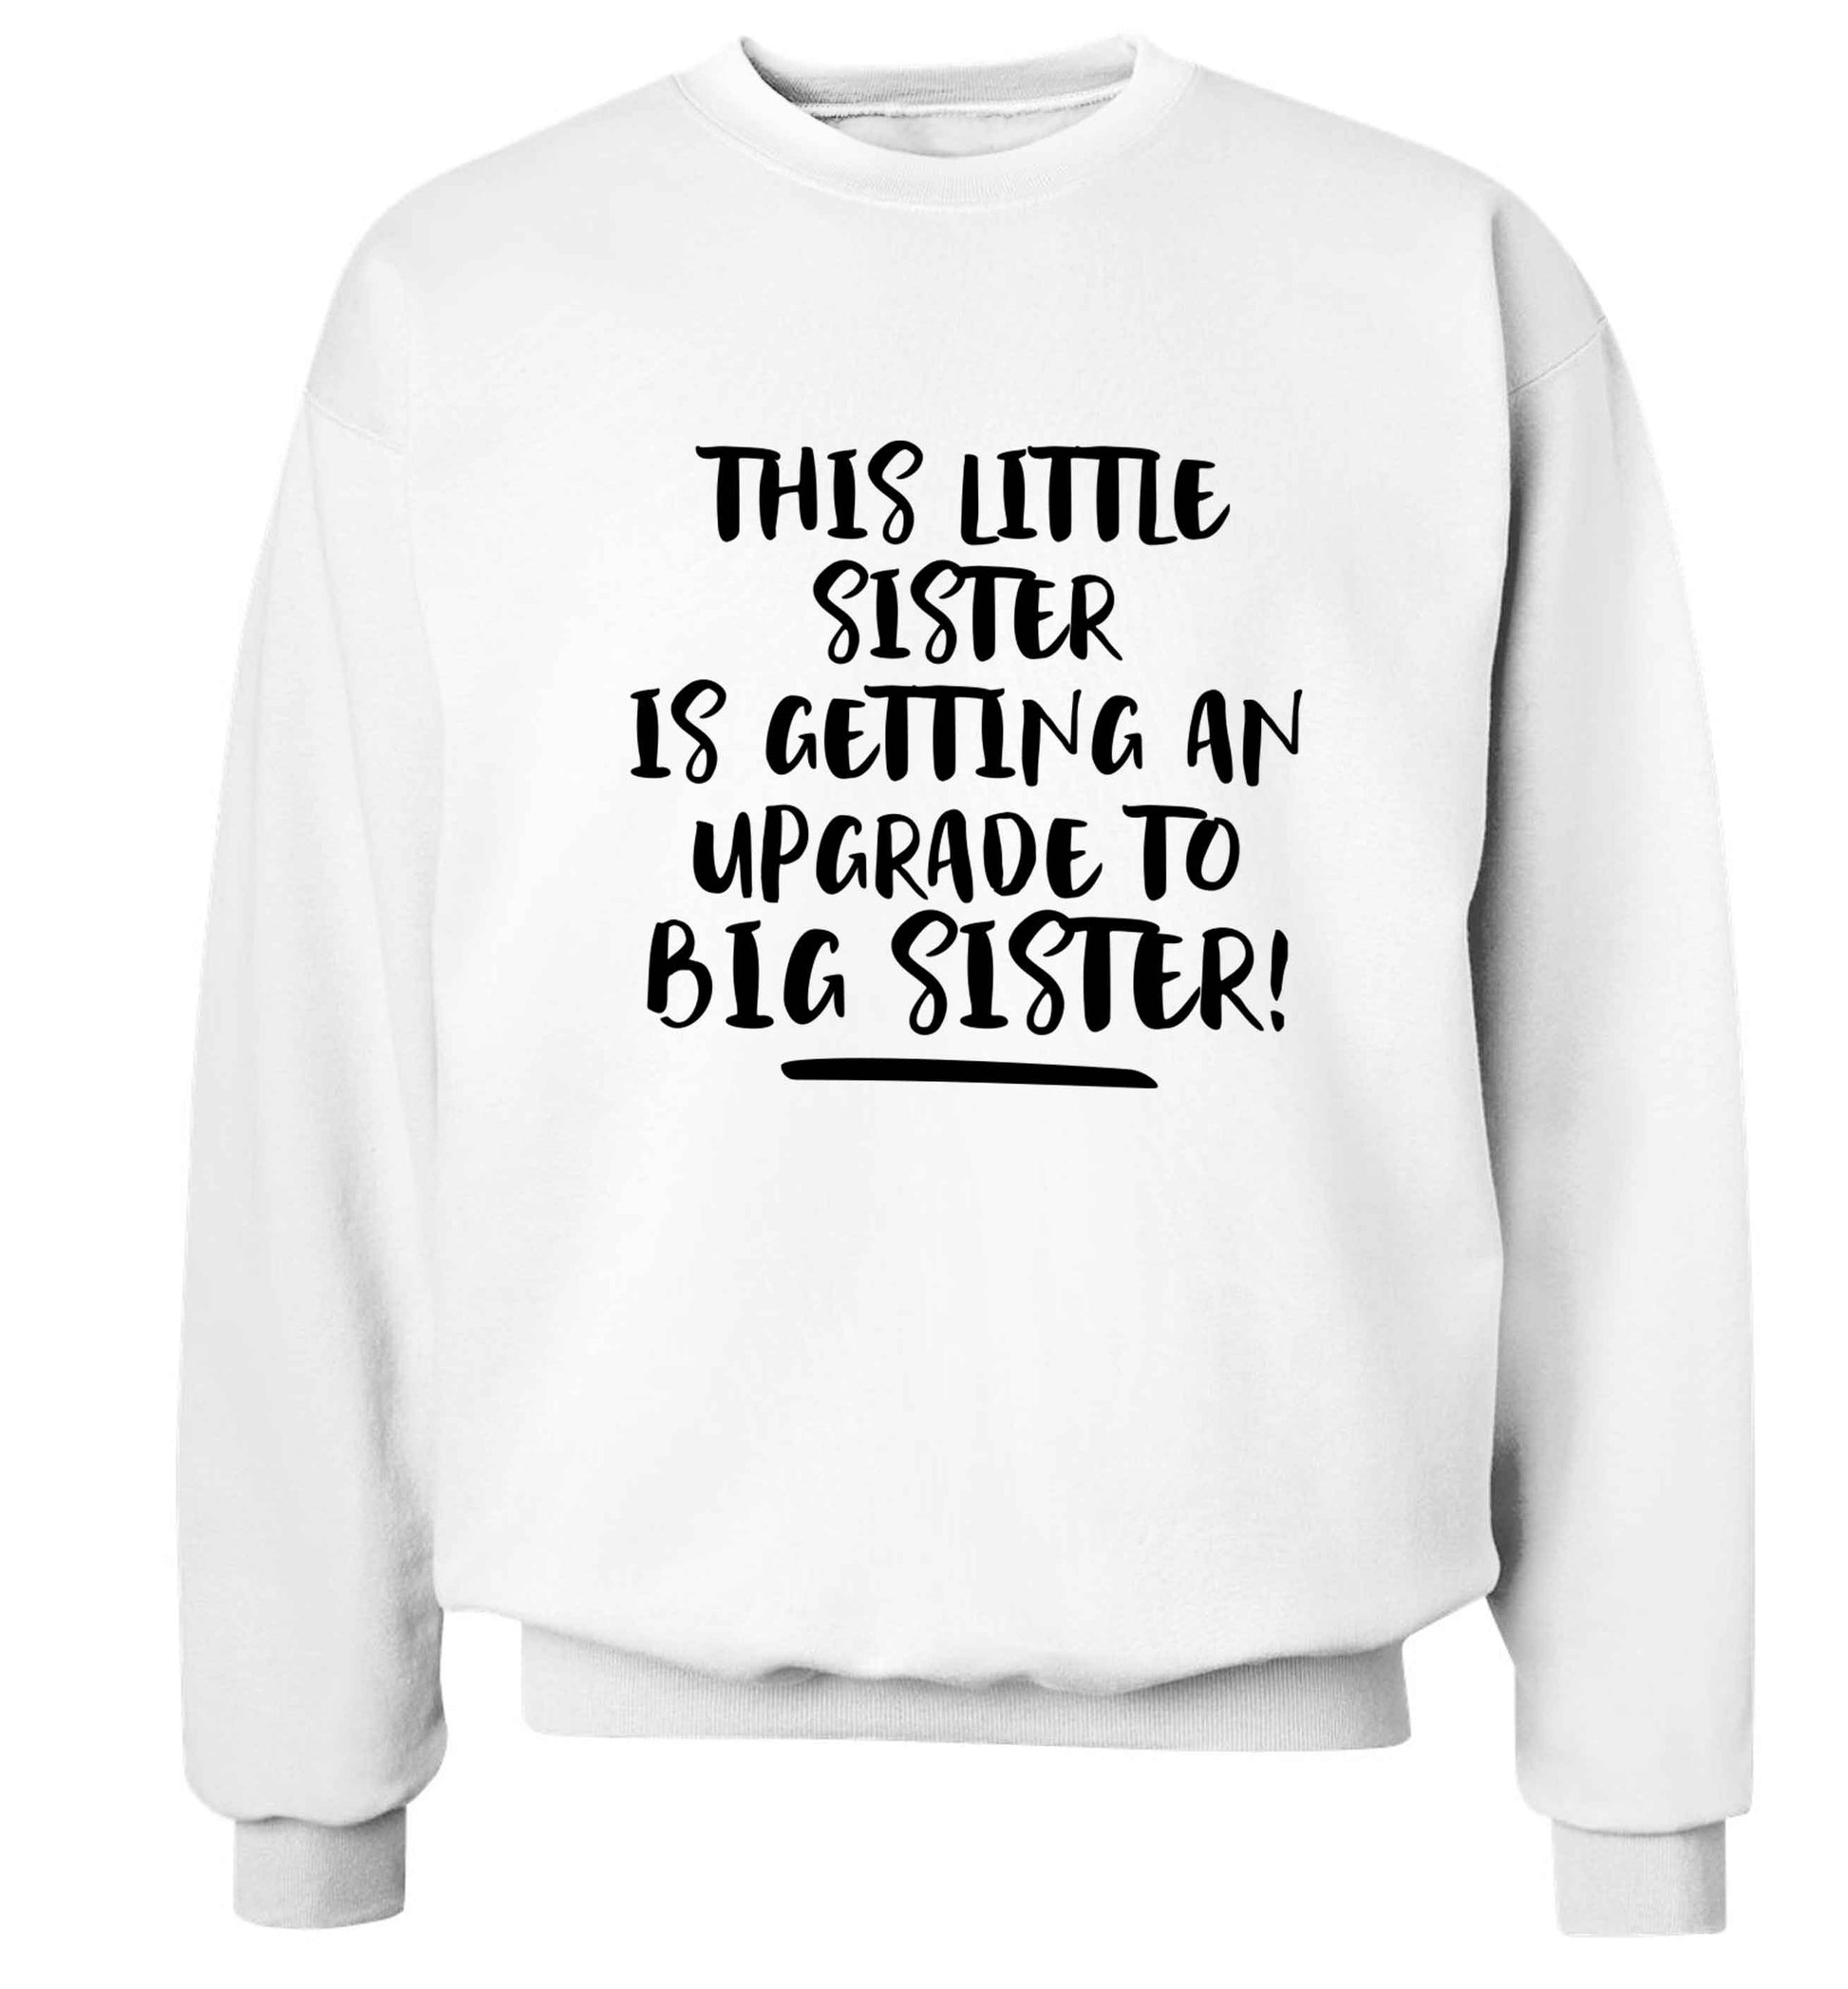 This little sister is getting an upgrade to big sister! Adult's unisex white Sweater 2XL